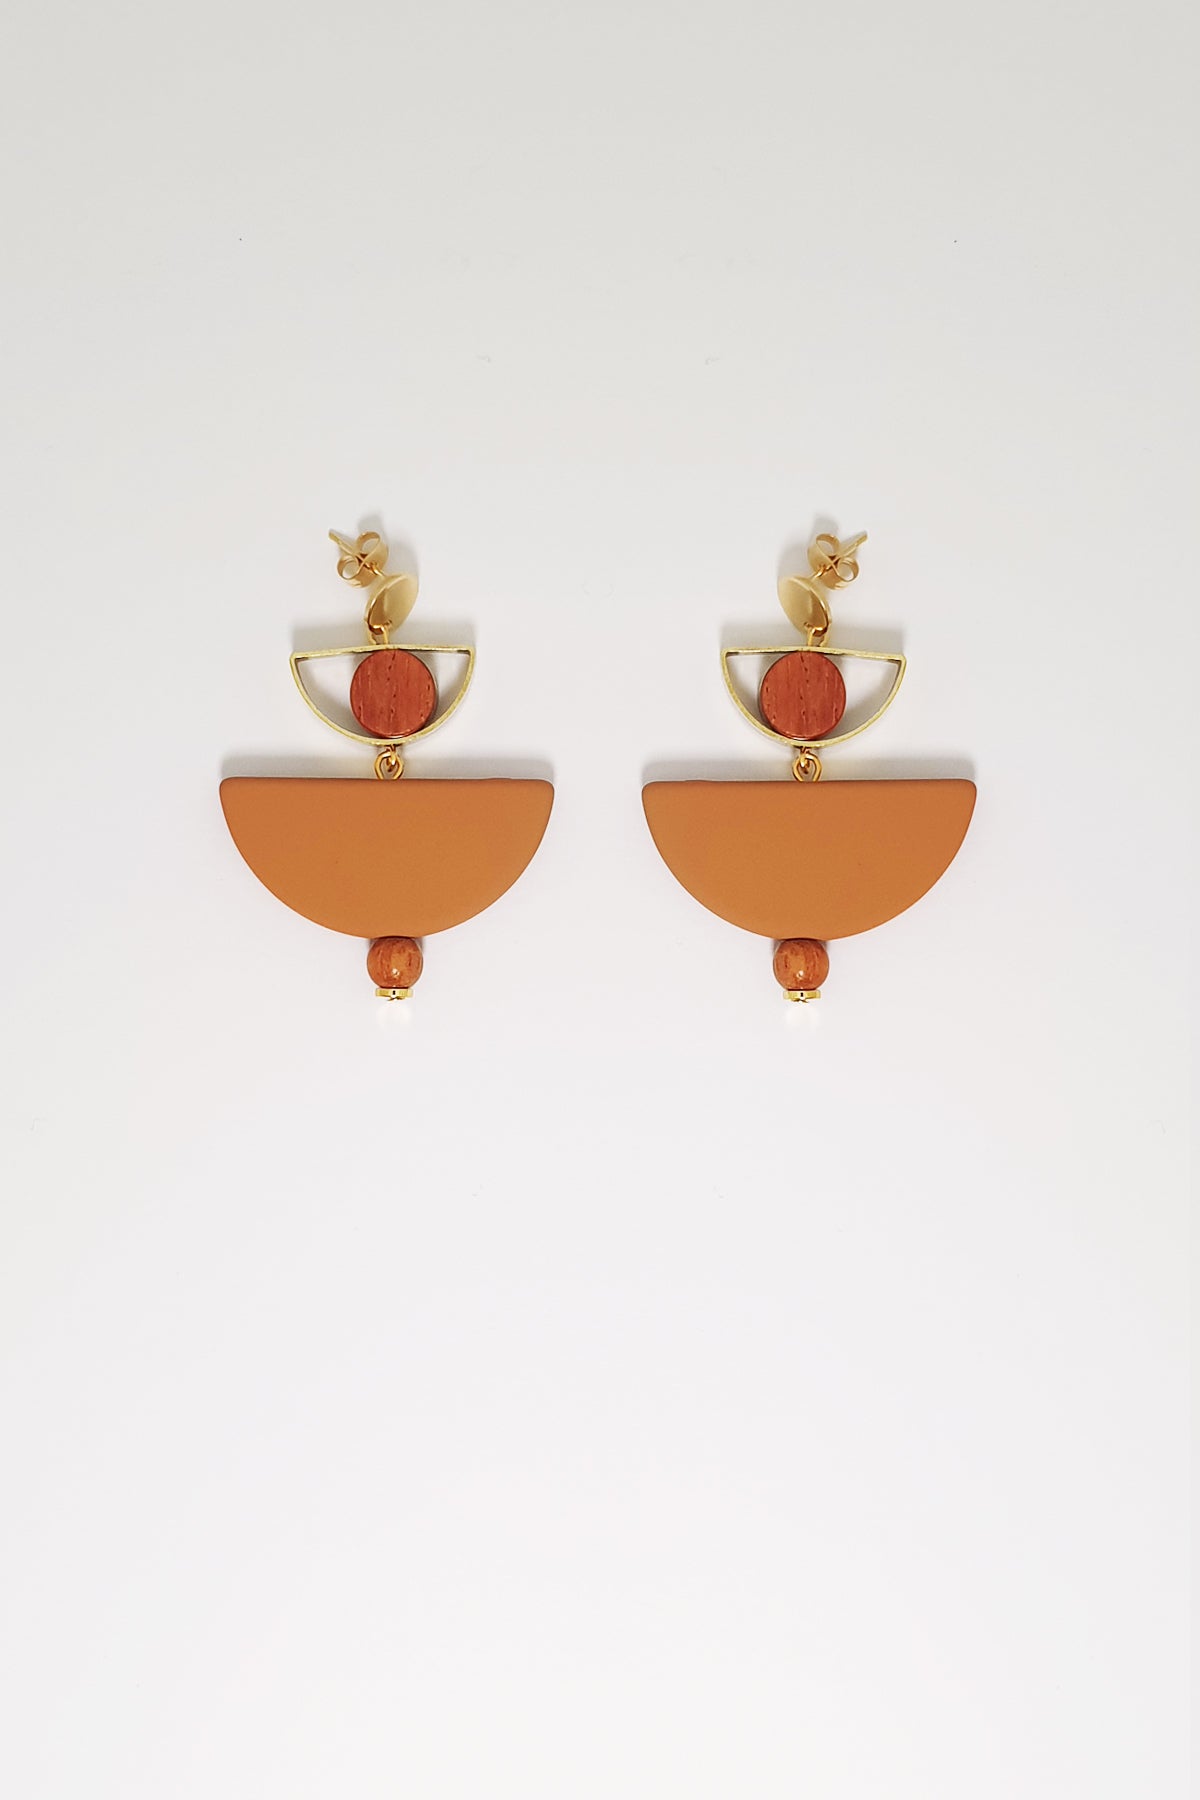 A pair of stud dangle earrings sit against a white background. They feature a small half circle brass piece with a wooden circle bead enclosed, below this hangs a mustard D shape bead followed by a small wooden bead and a tiny gold bead.